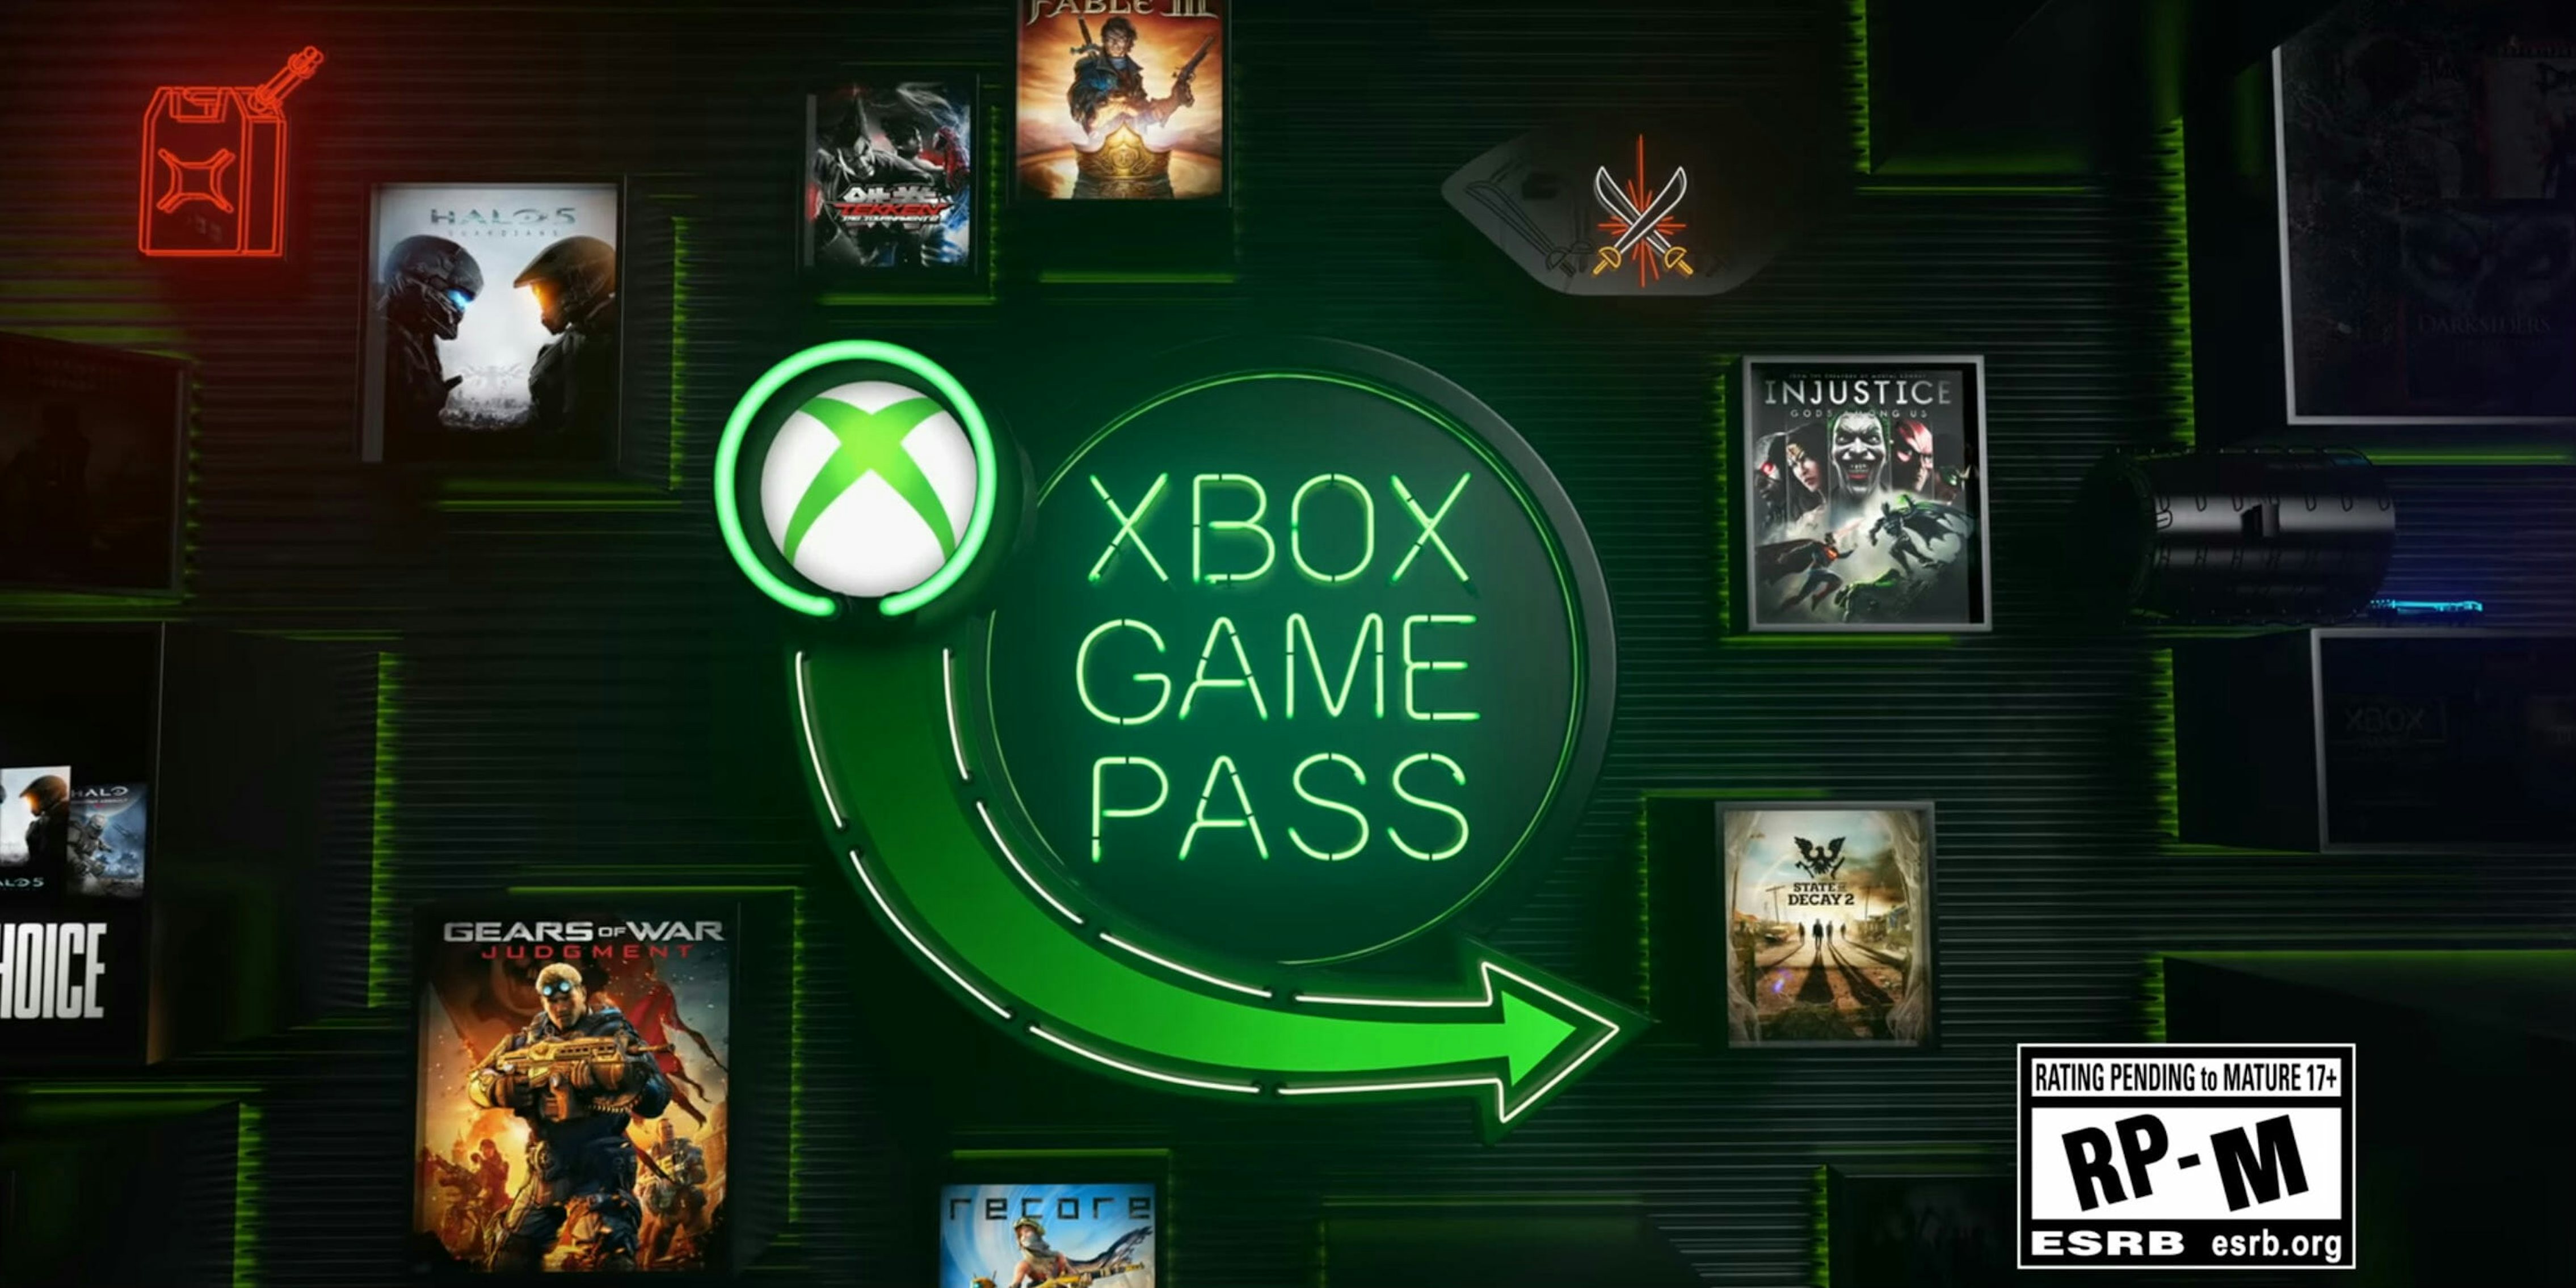 Xbox games. Game Pass. Xbox Ultimate. Xbox Pass. Xbox game pass ultimate для пк